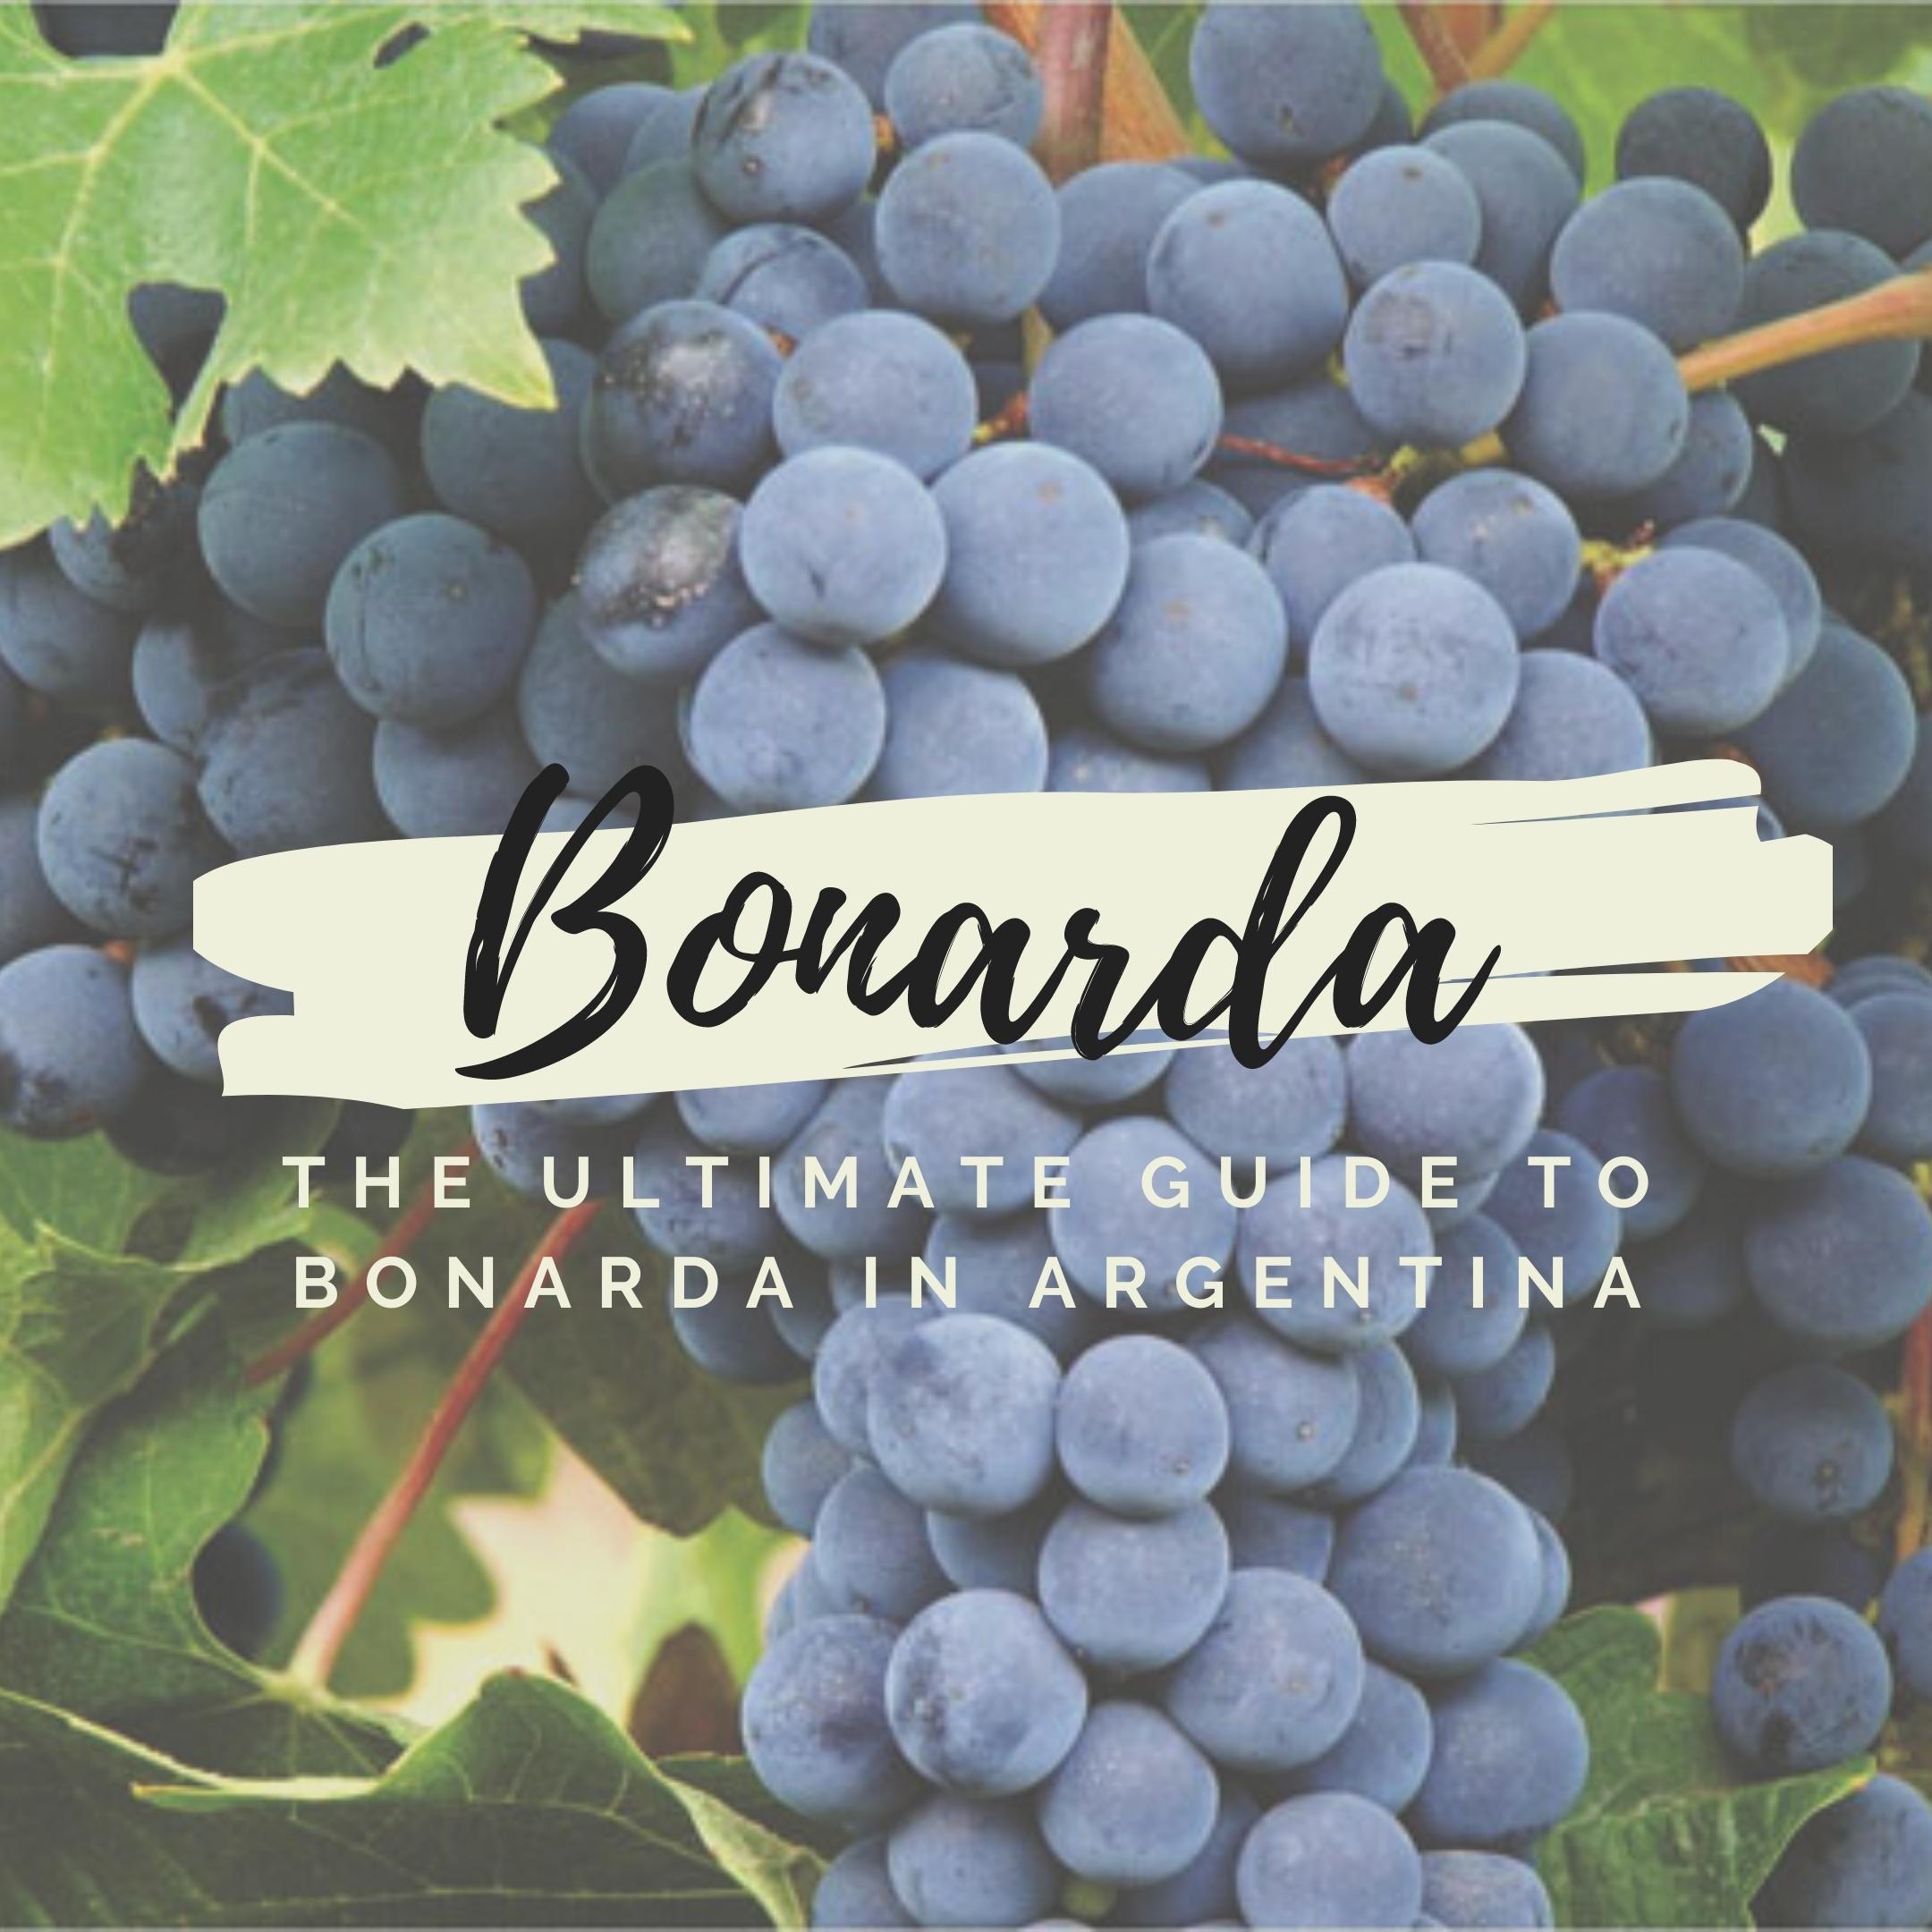 The ultimate guide to Bonarda grape variety in Argentina